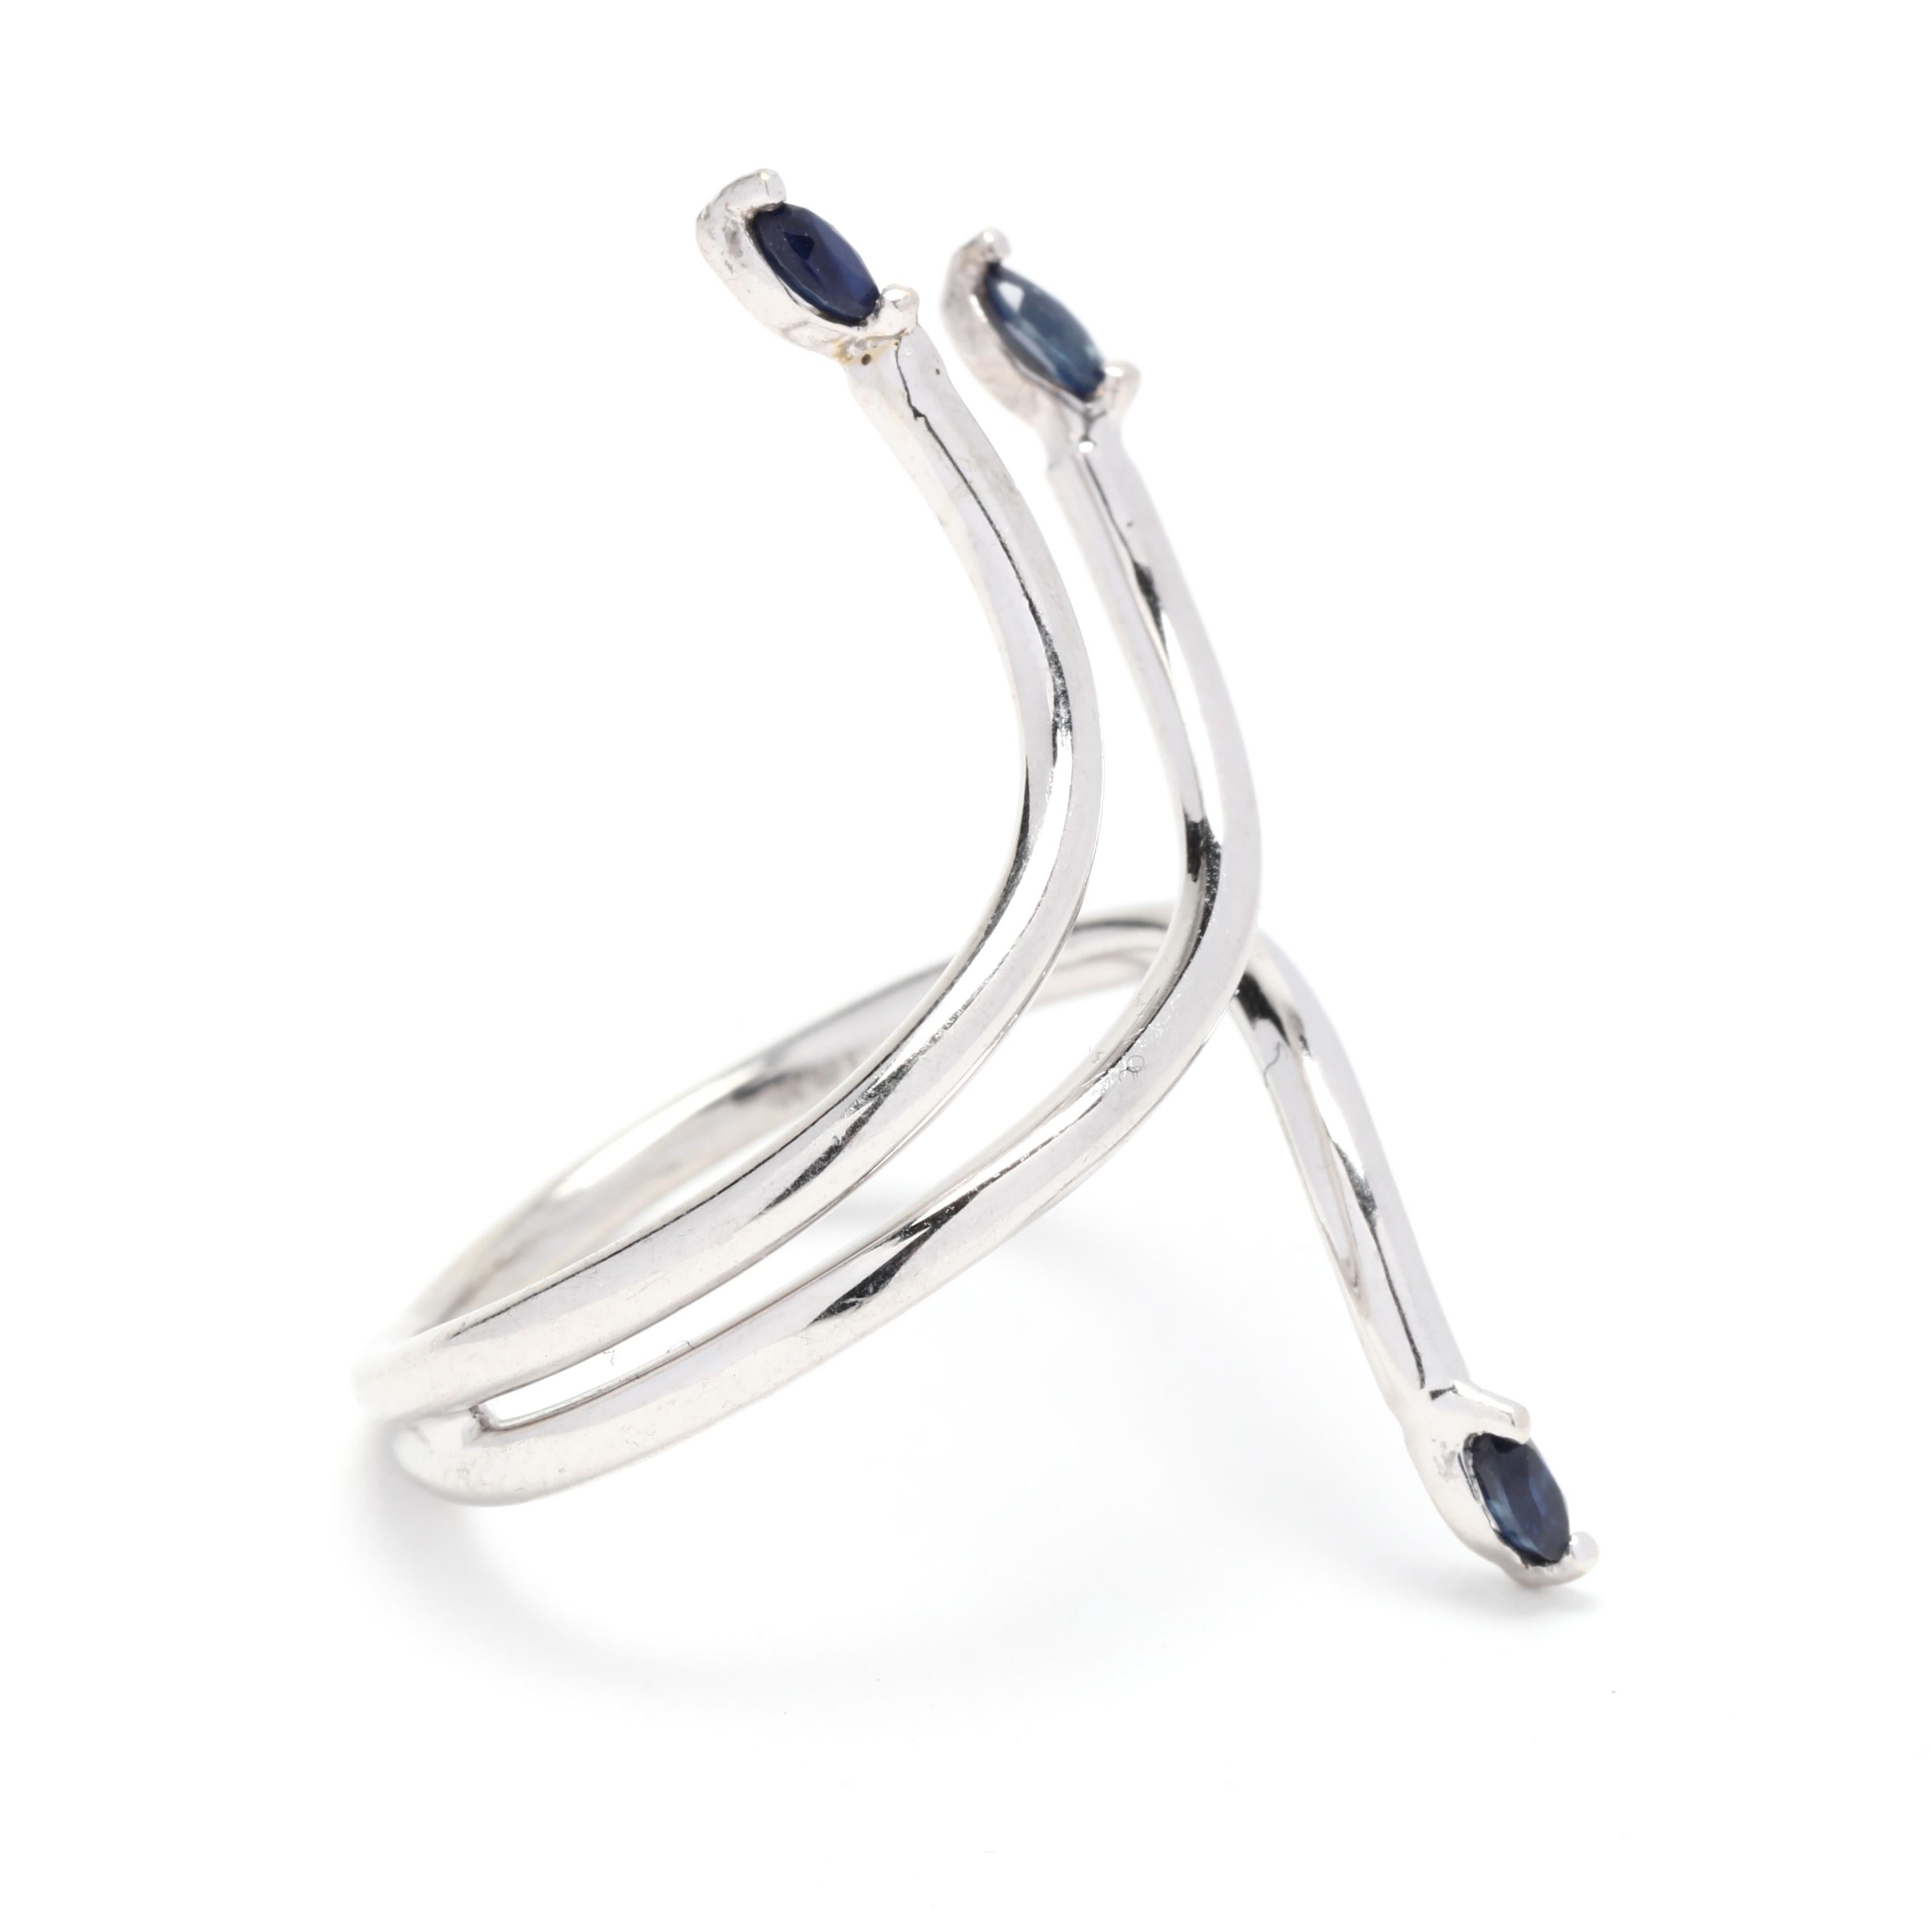 An 18 karat white gold Italian sapphire bypass wrap ring. This long sapphire ring features a wrap around design with thin white gold wire set with marquise cut sapphires at the ends weighing approximately .18 total carats.

Stones:
- sapphire, 3